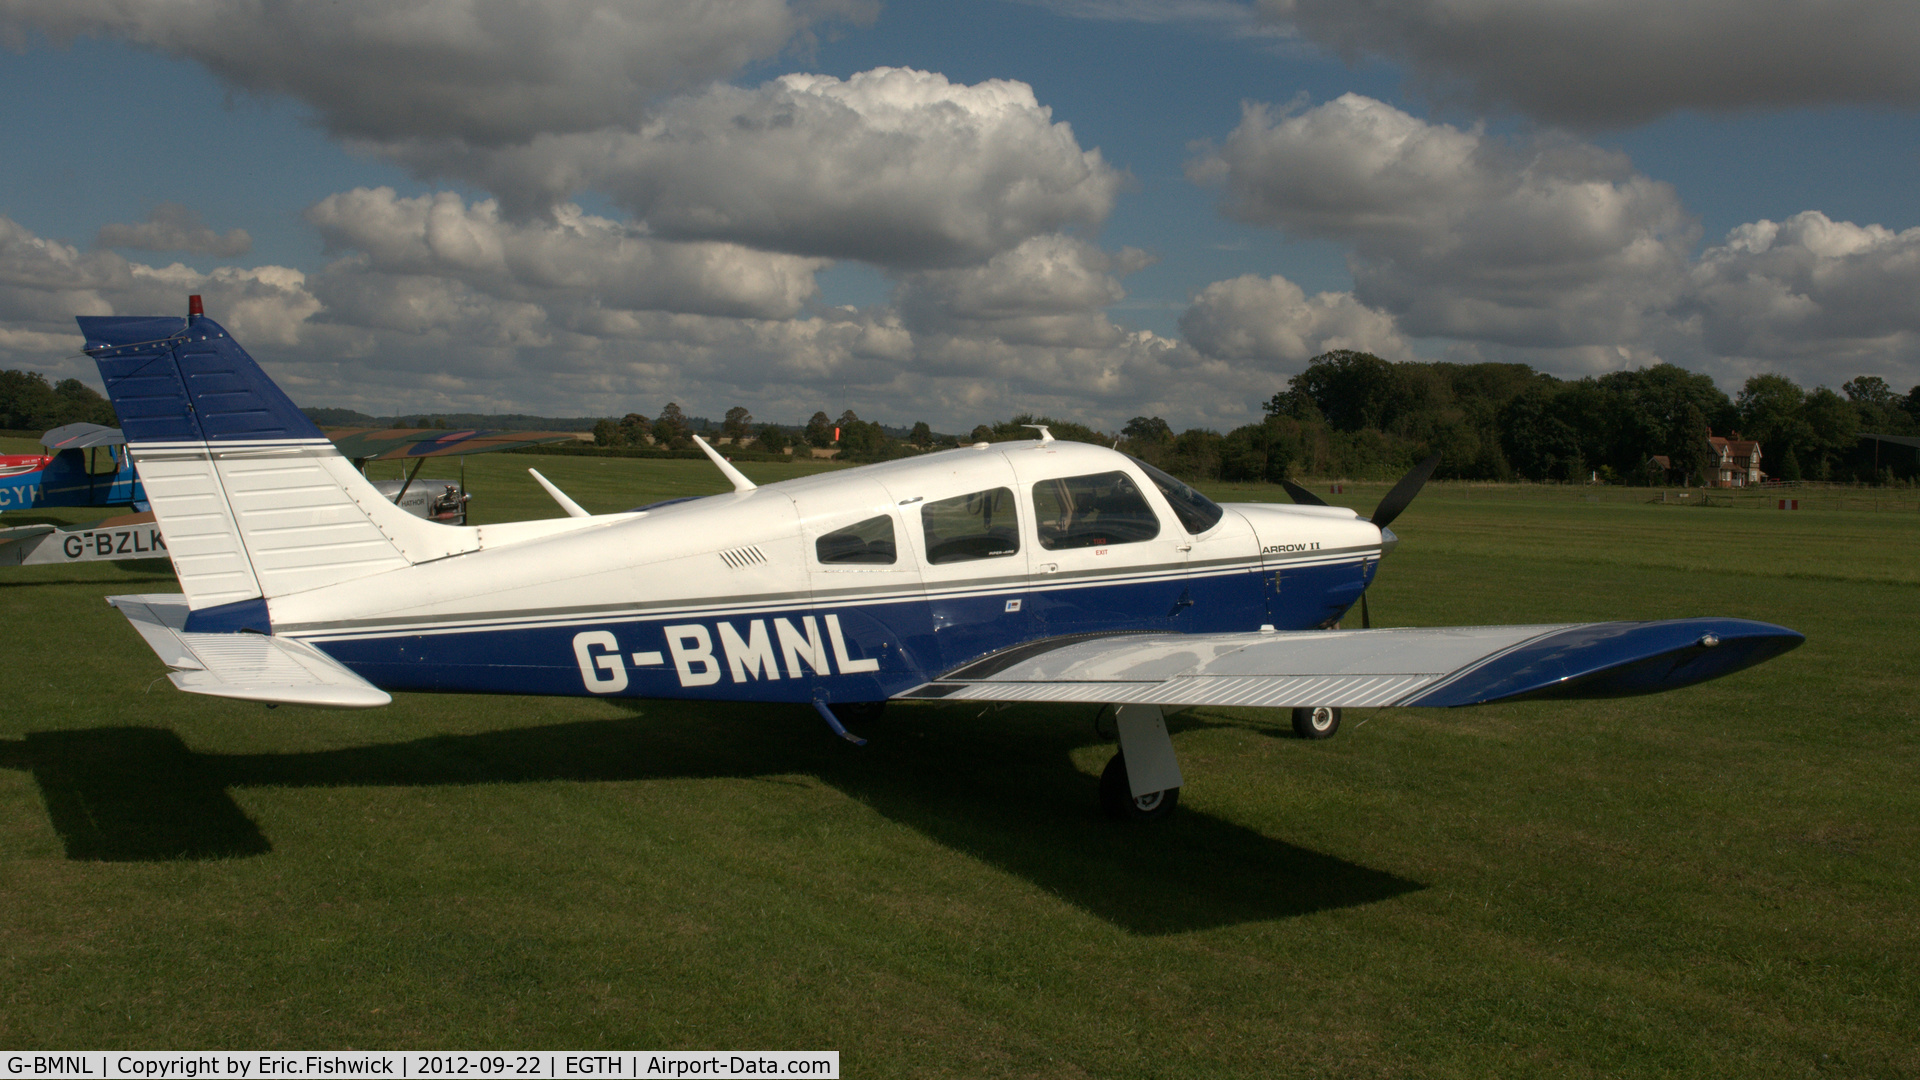 G-BMNL, 1975 Piper PA-28R-200 Cherokee Arrow C/N 28R-7535040, 2. G-BMNL at Shuttleworth Uncovered - Air Show, Sept. 2012.